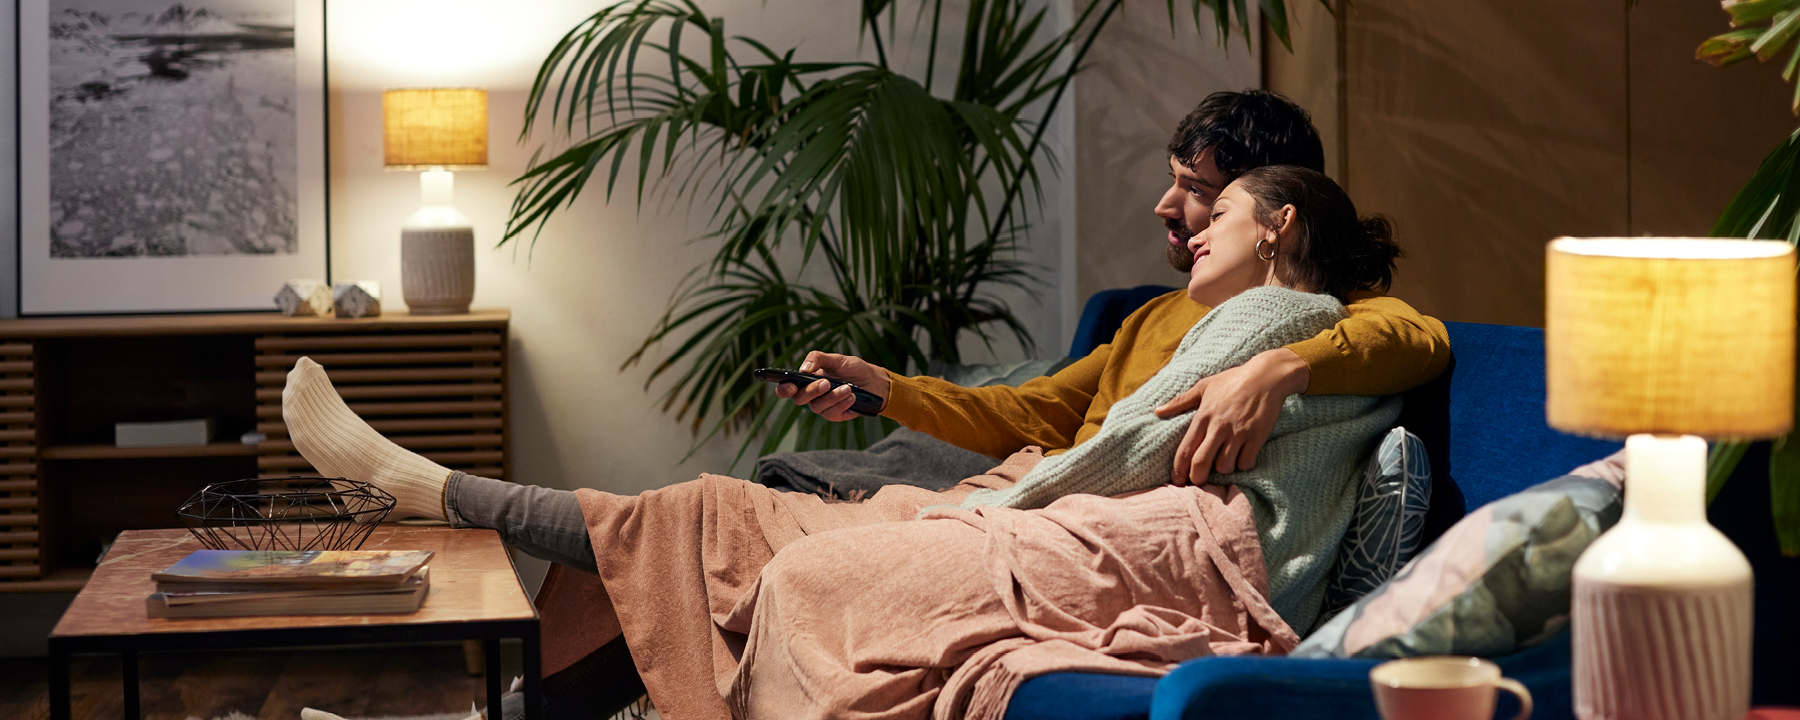 Mortgage - couple sitting on sofa watching Television